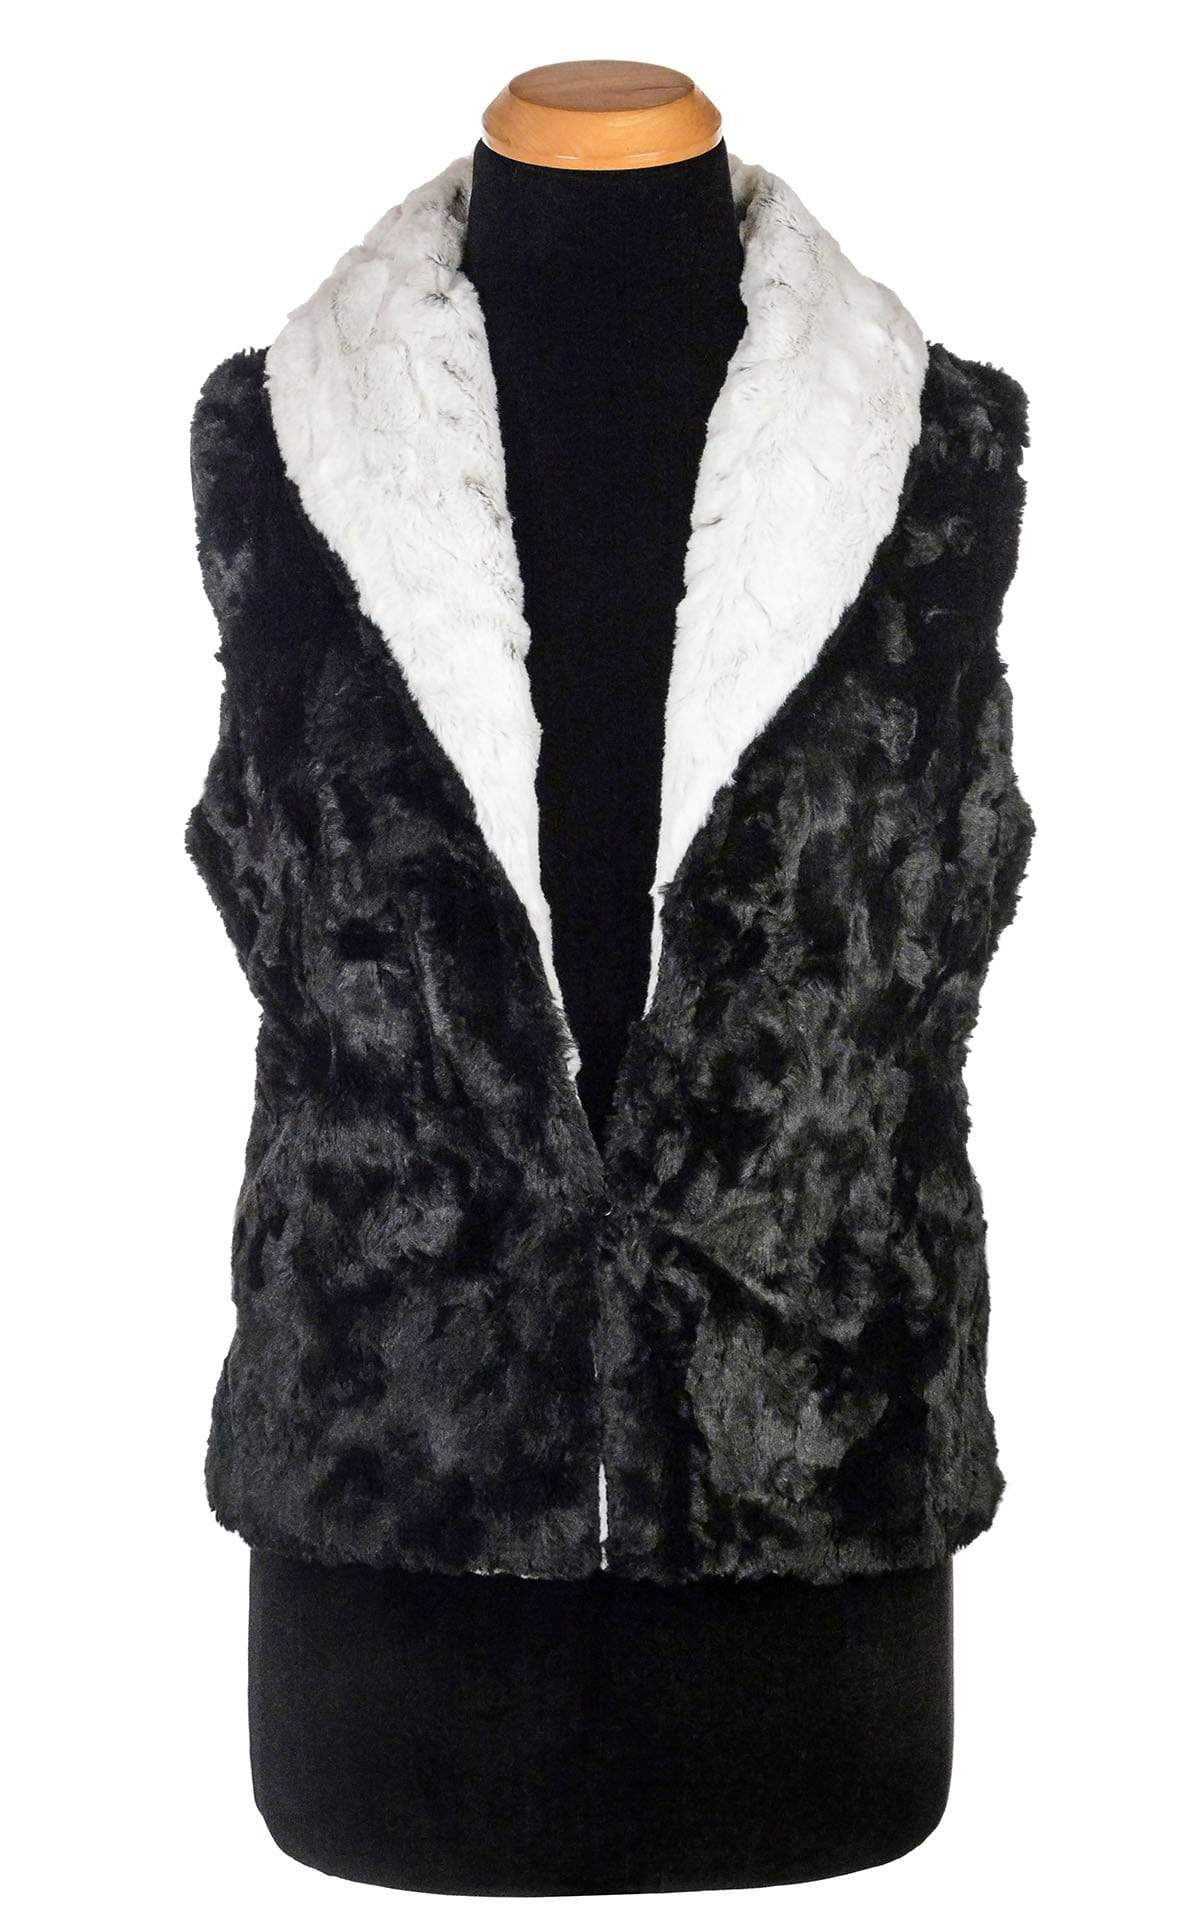 Reversed Shawl Collar Vest Closed View | Winter Frost Faux Fur with Cuddly Black Faux Fur | Handmade by Pandemonium Millinery | Seattle WA USA